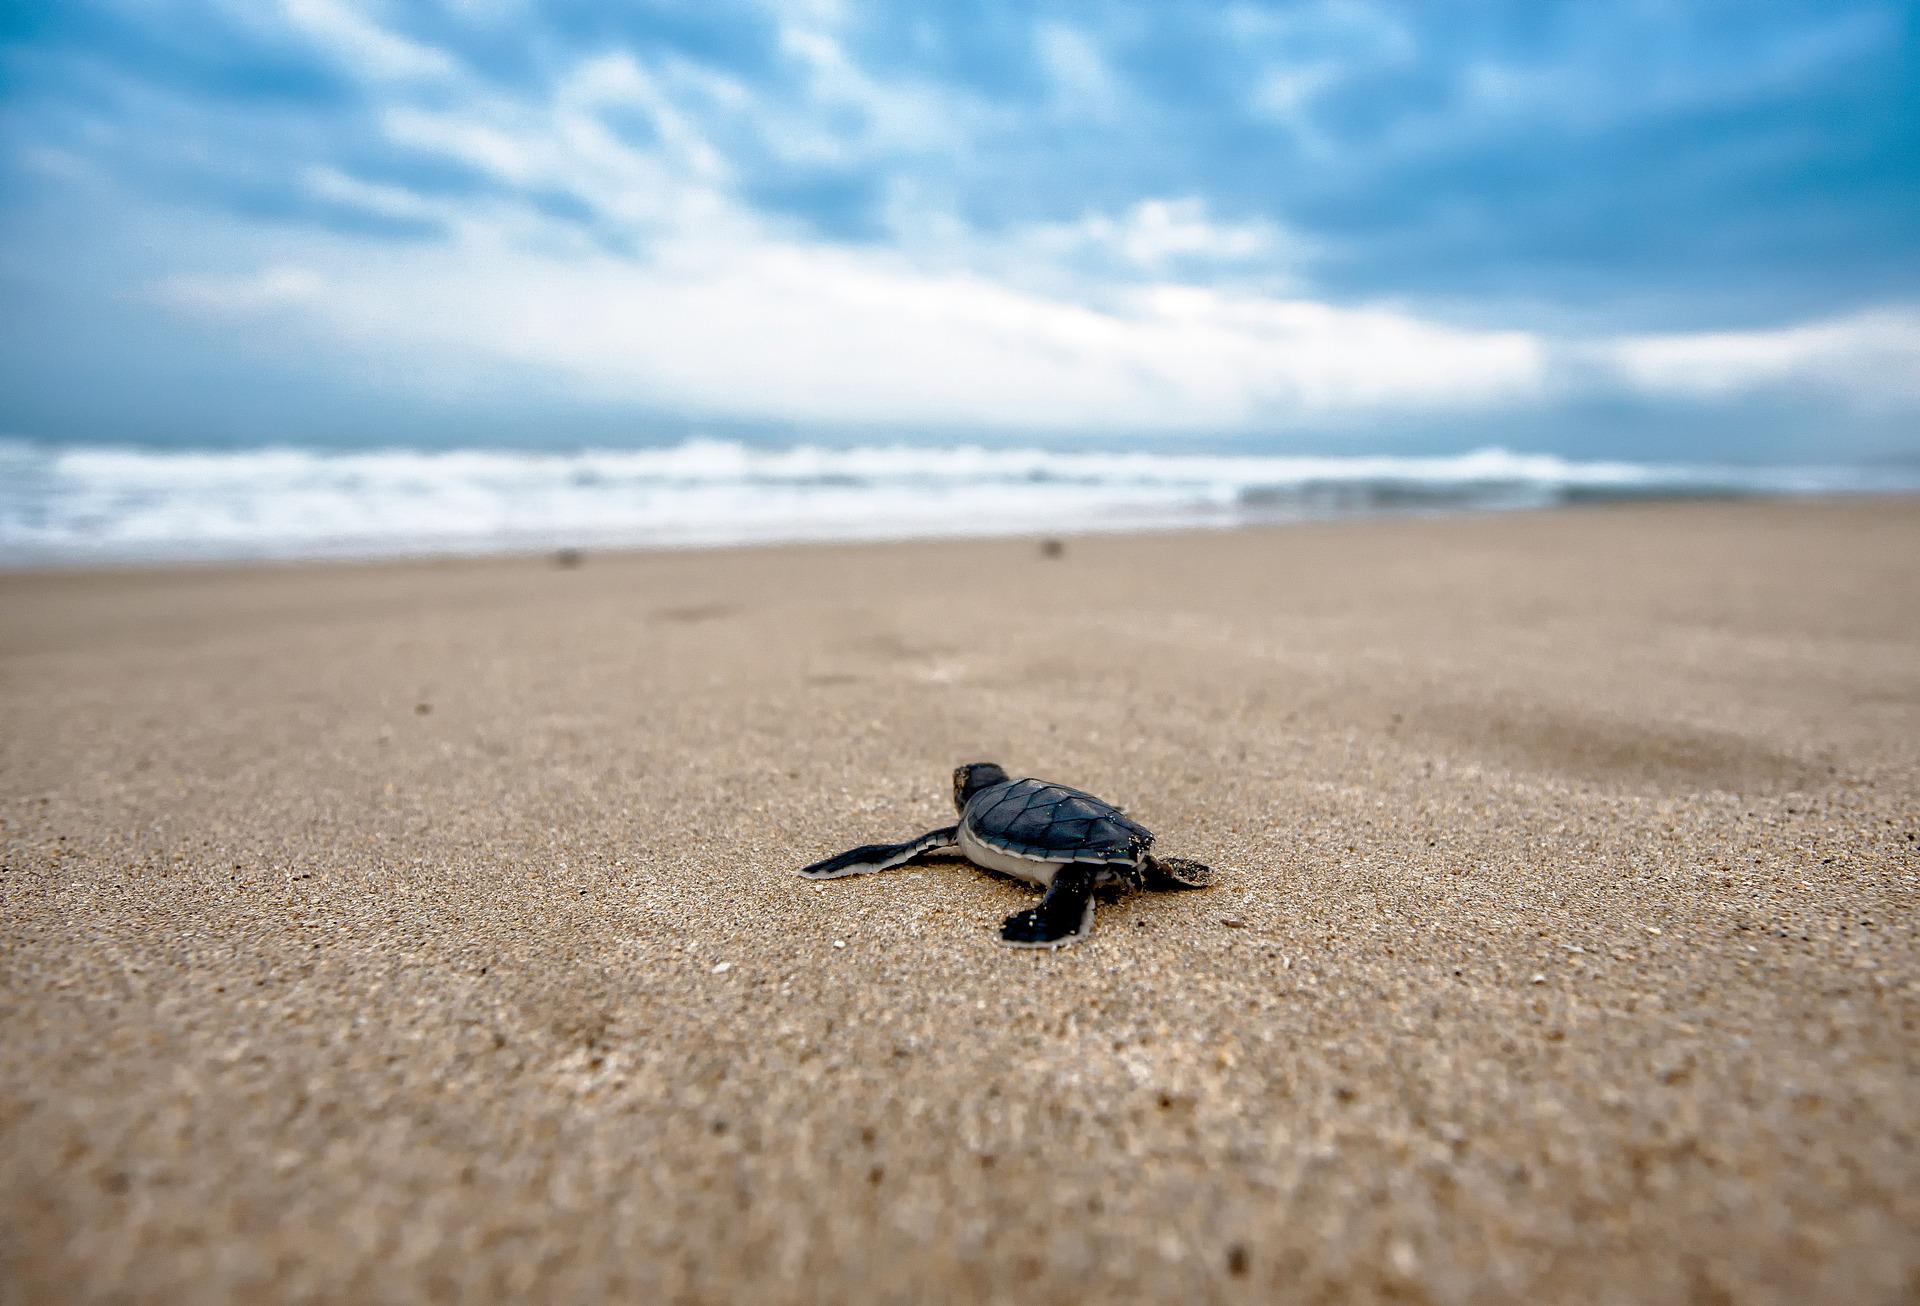 A baby turtle on the beach, crawling toward the ocean.